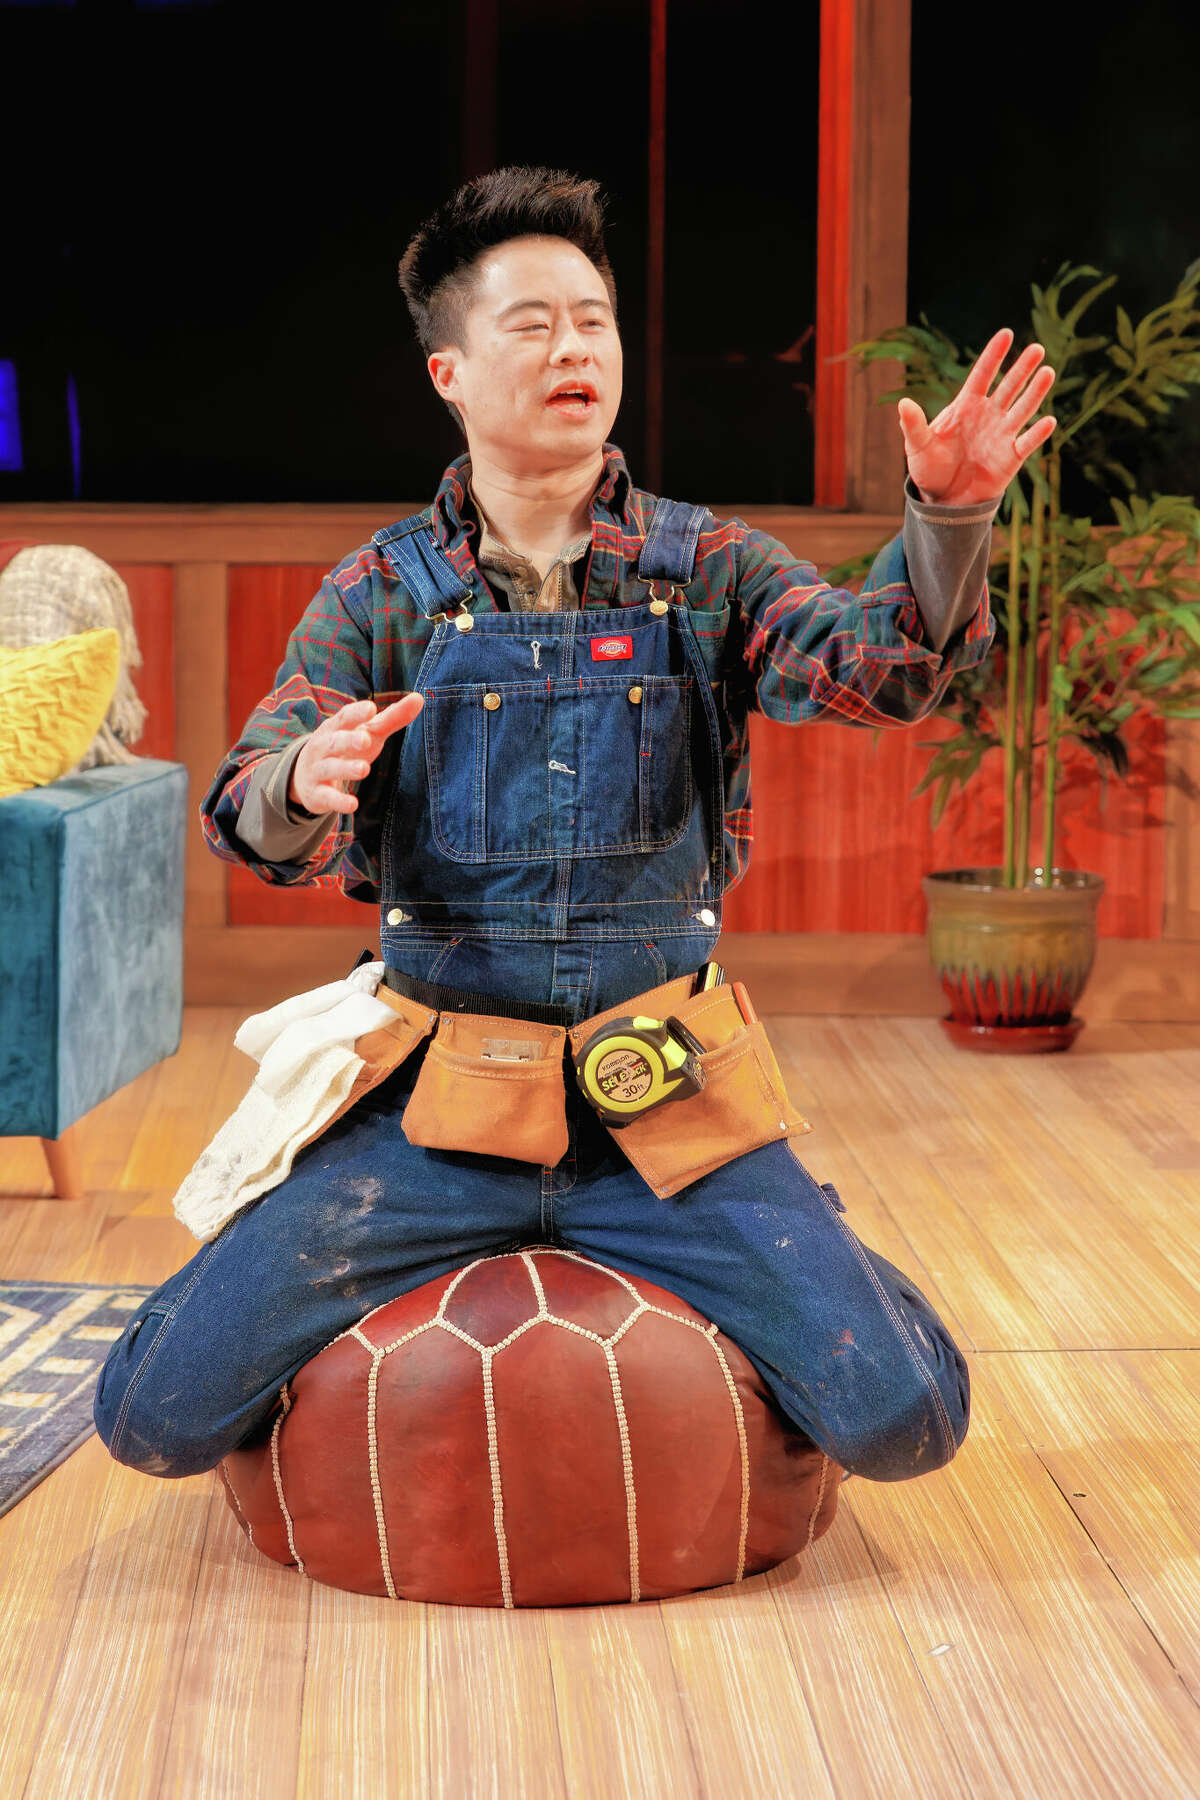 Whit K. Lee plays a handyman in the play "Secret Hour," running Jan. 27 to Feb. 19, 2023, at Capital Repertory Theatre in Albany. The  world-premiere play, by Jenny Stafford, won The Rep's Next Act! New Play Summit in 2021.